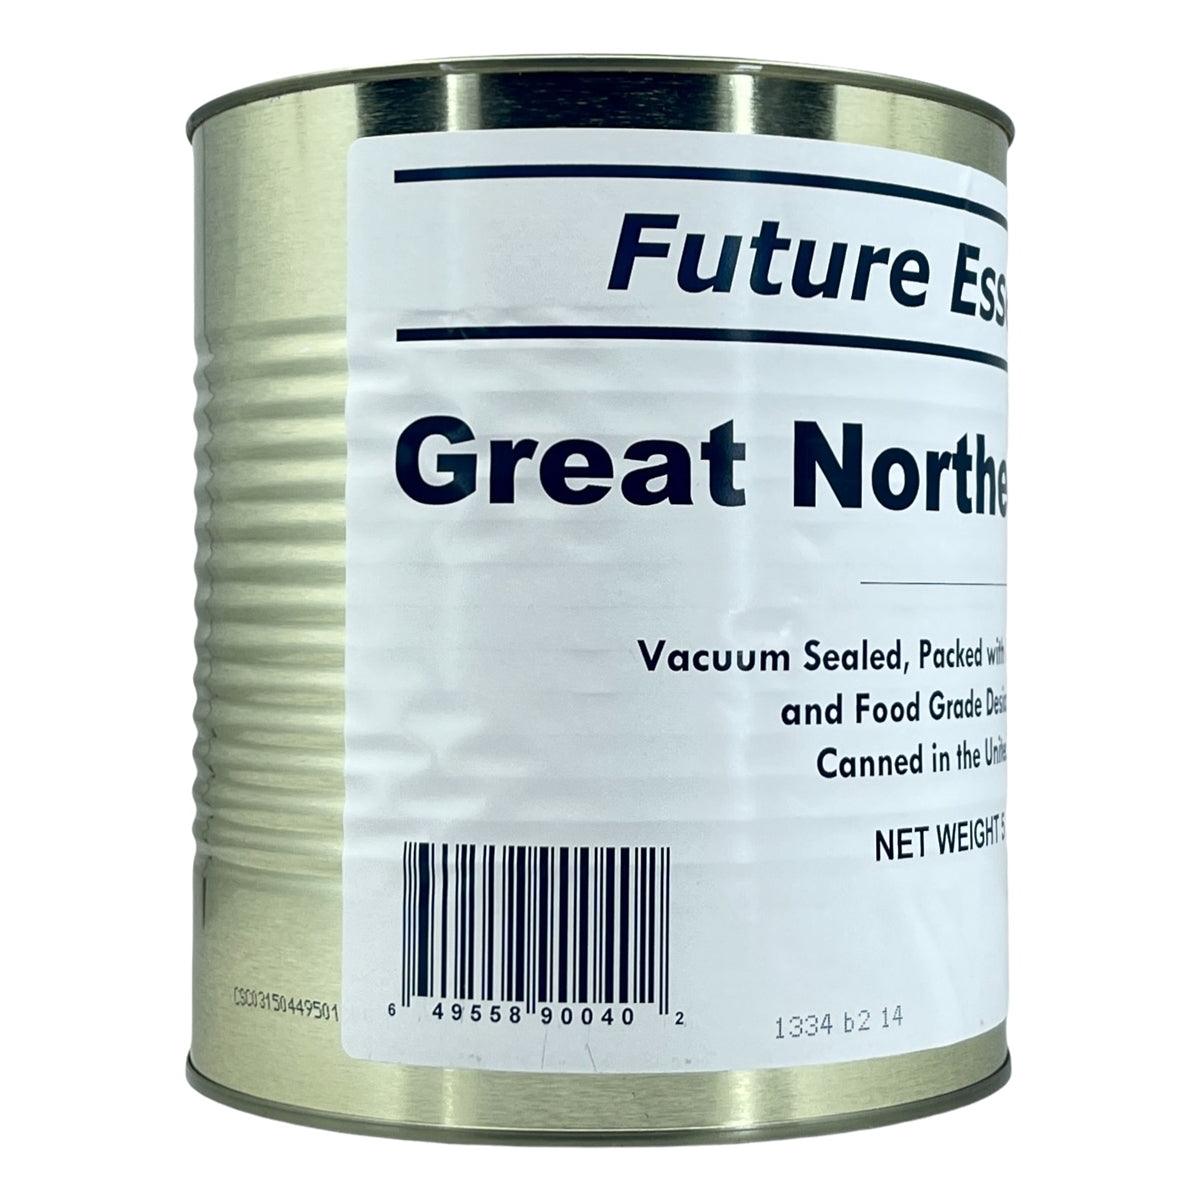 Case of Future Essentials Great Northern Beans,( Case of 6 Cans ) - Safecastle